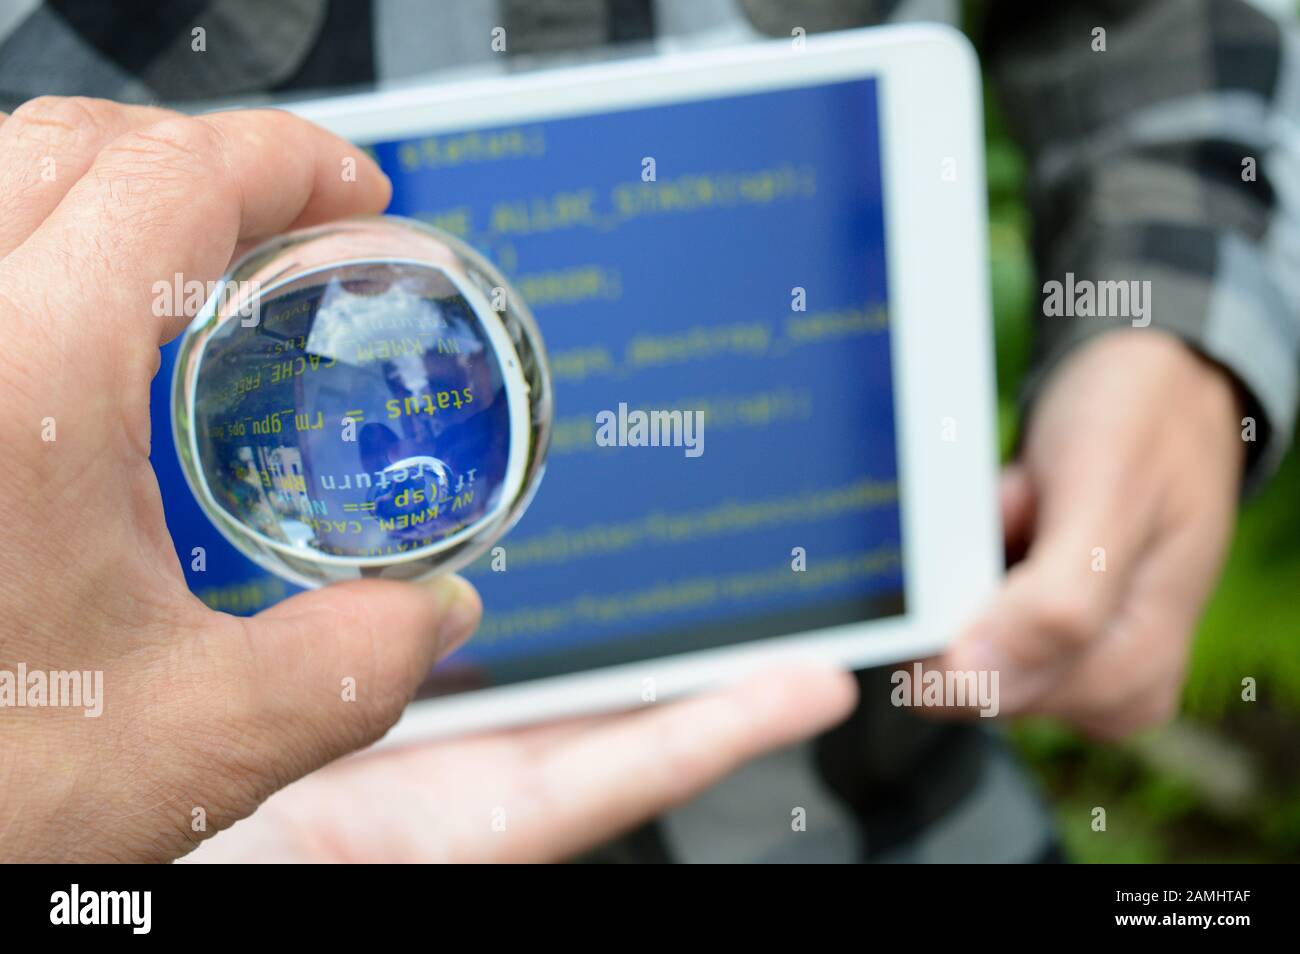 crystal ball in hand on the background of a blurred tablet with a blue screen, the repair procedure after hacker attacks, a warning concept Stock Photo